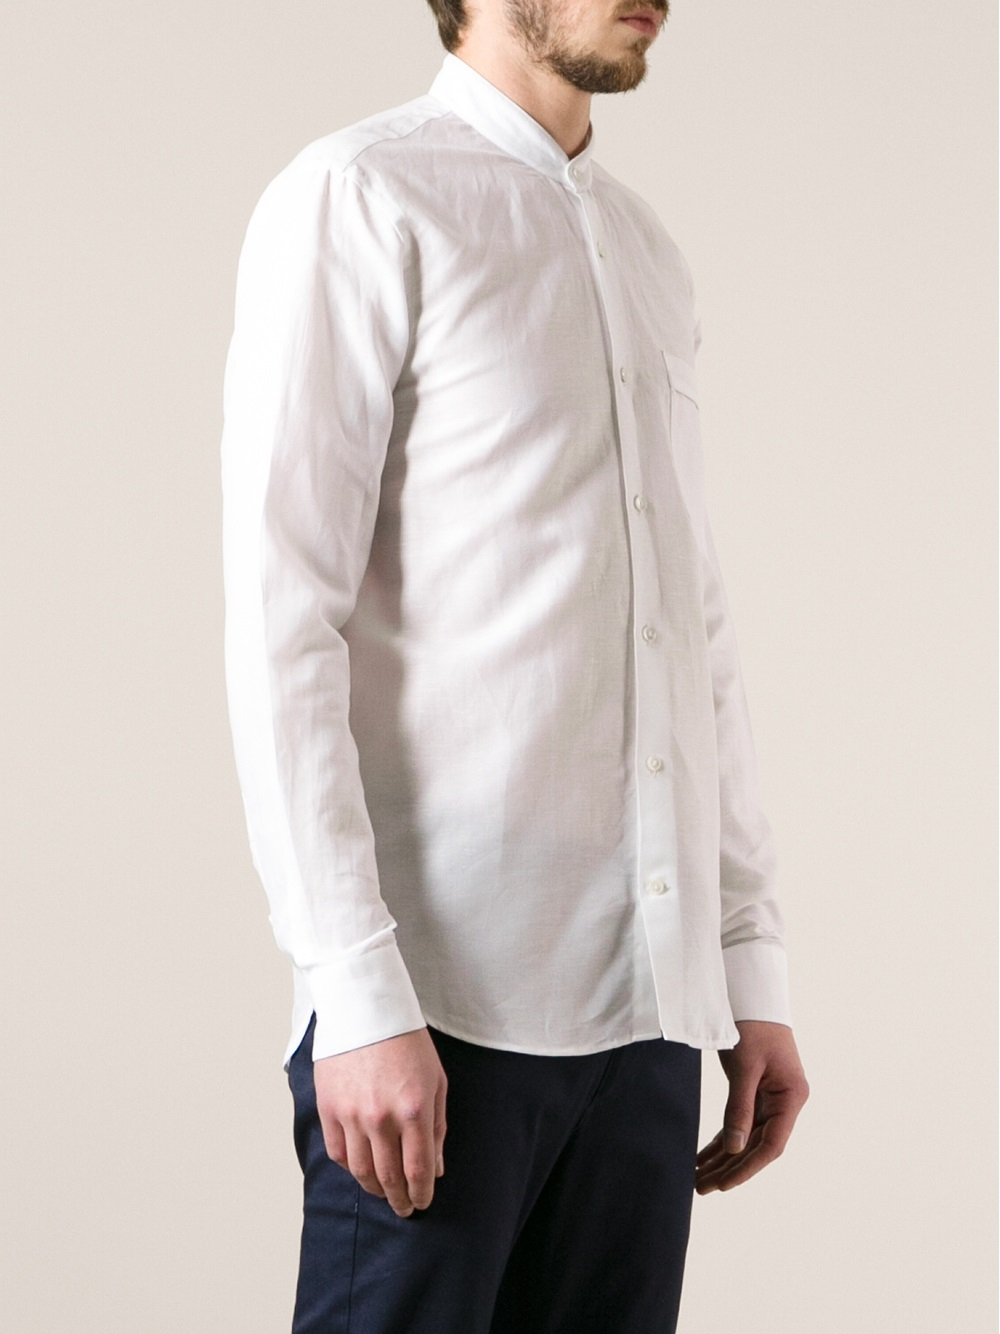 Lyst - Mauro Grifoni Button Up Shirt in White for Men